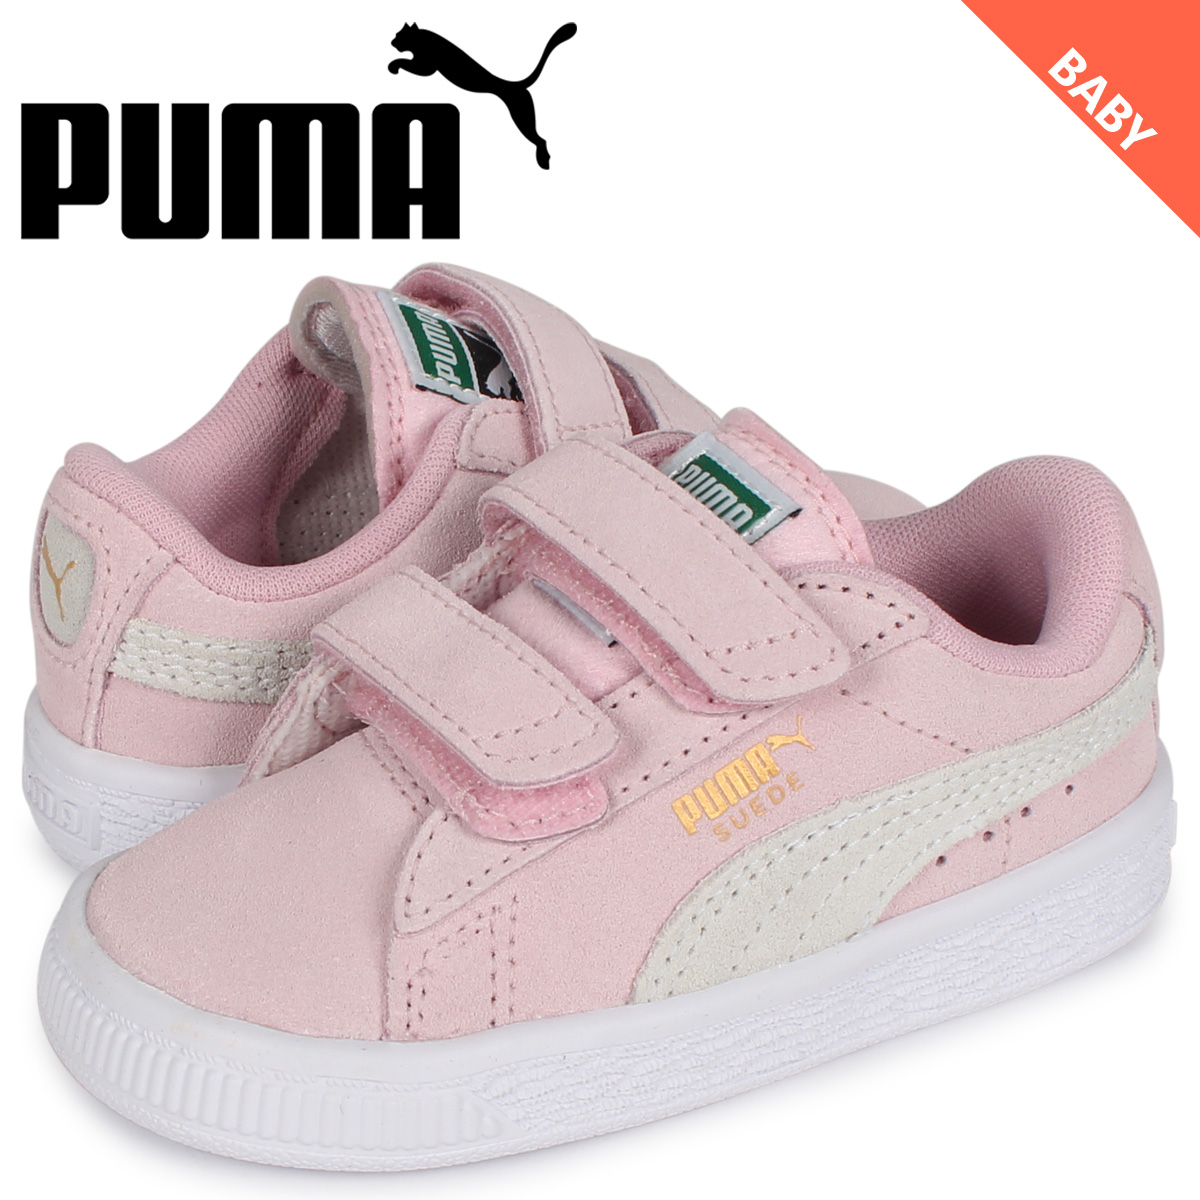 white gold and pink pumas